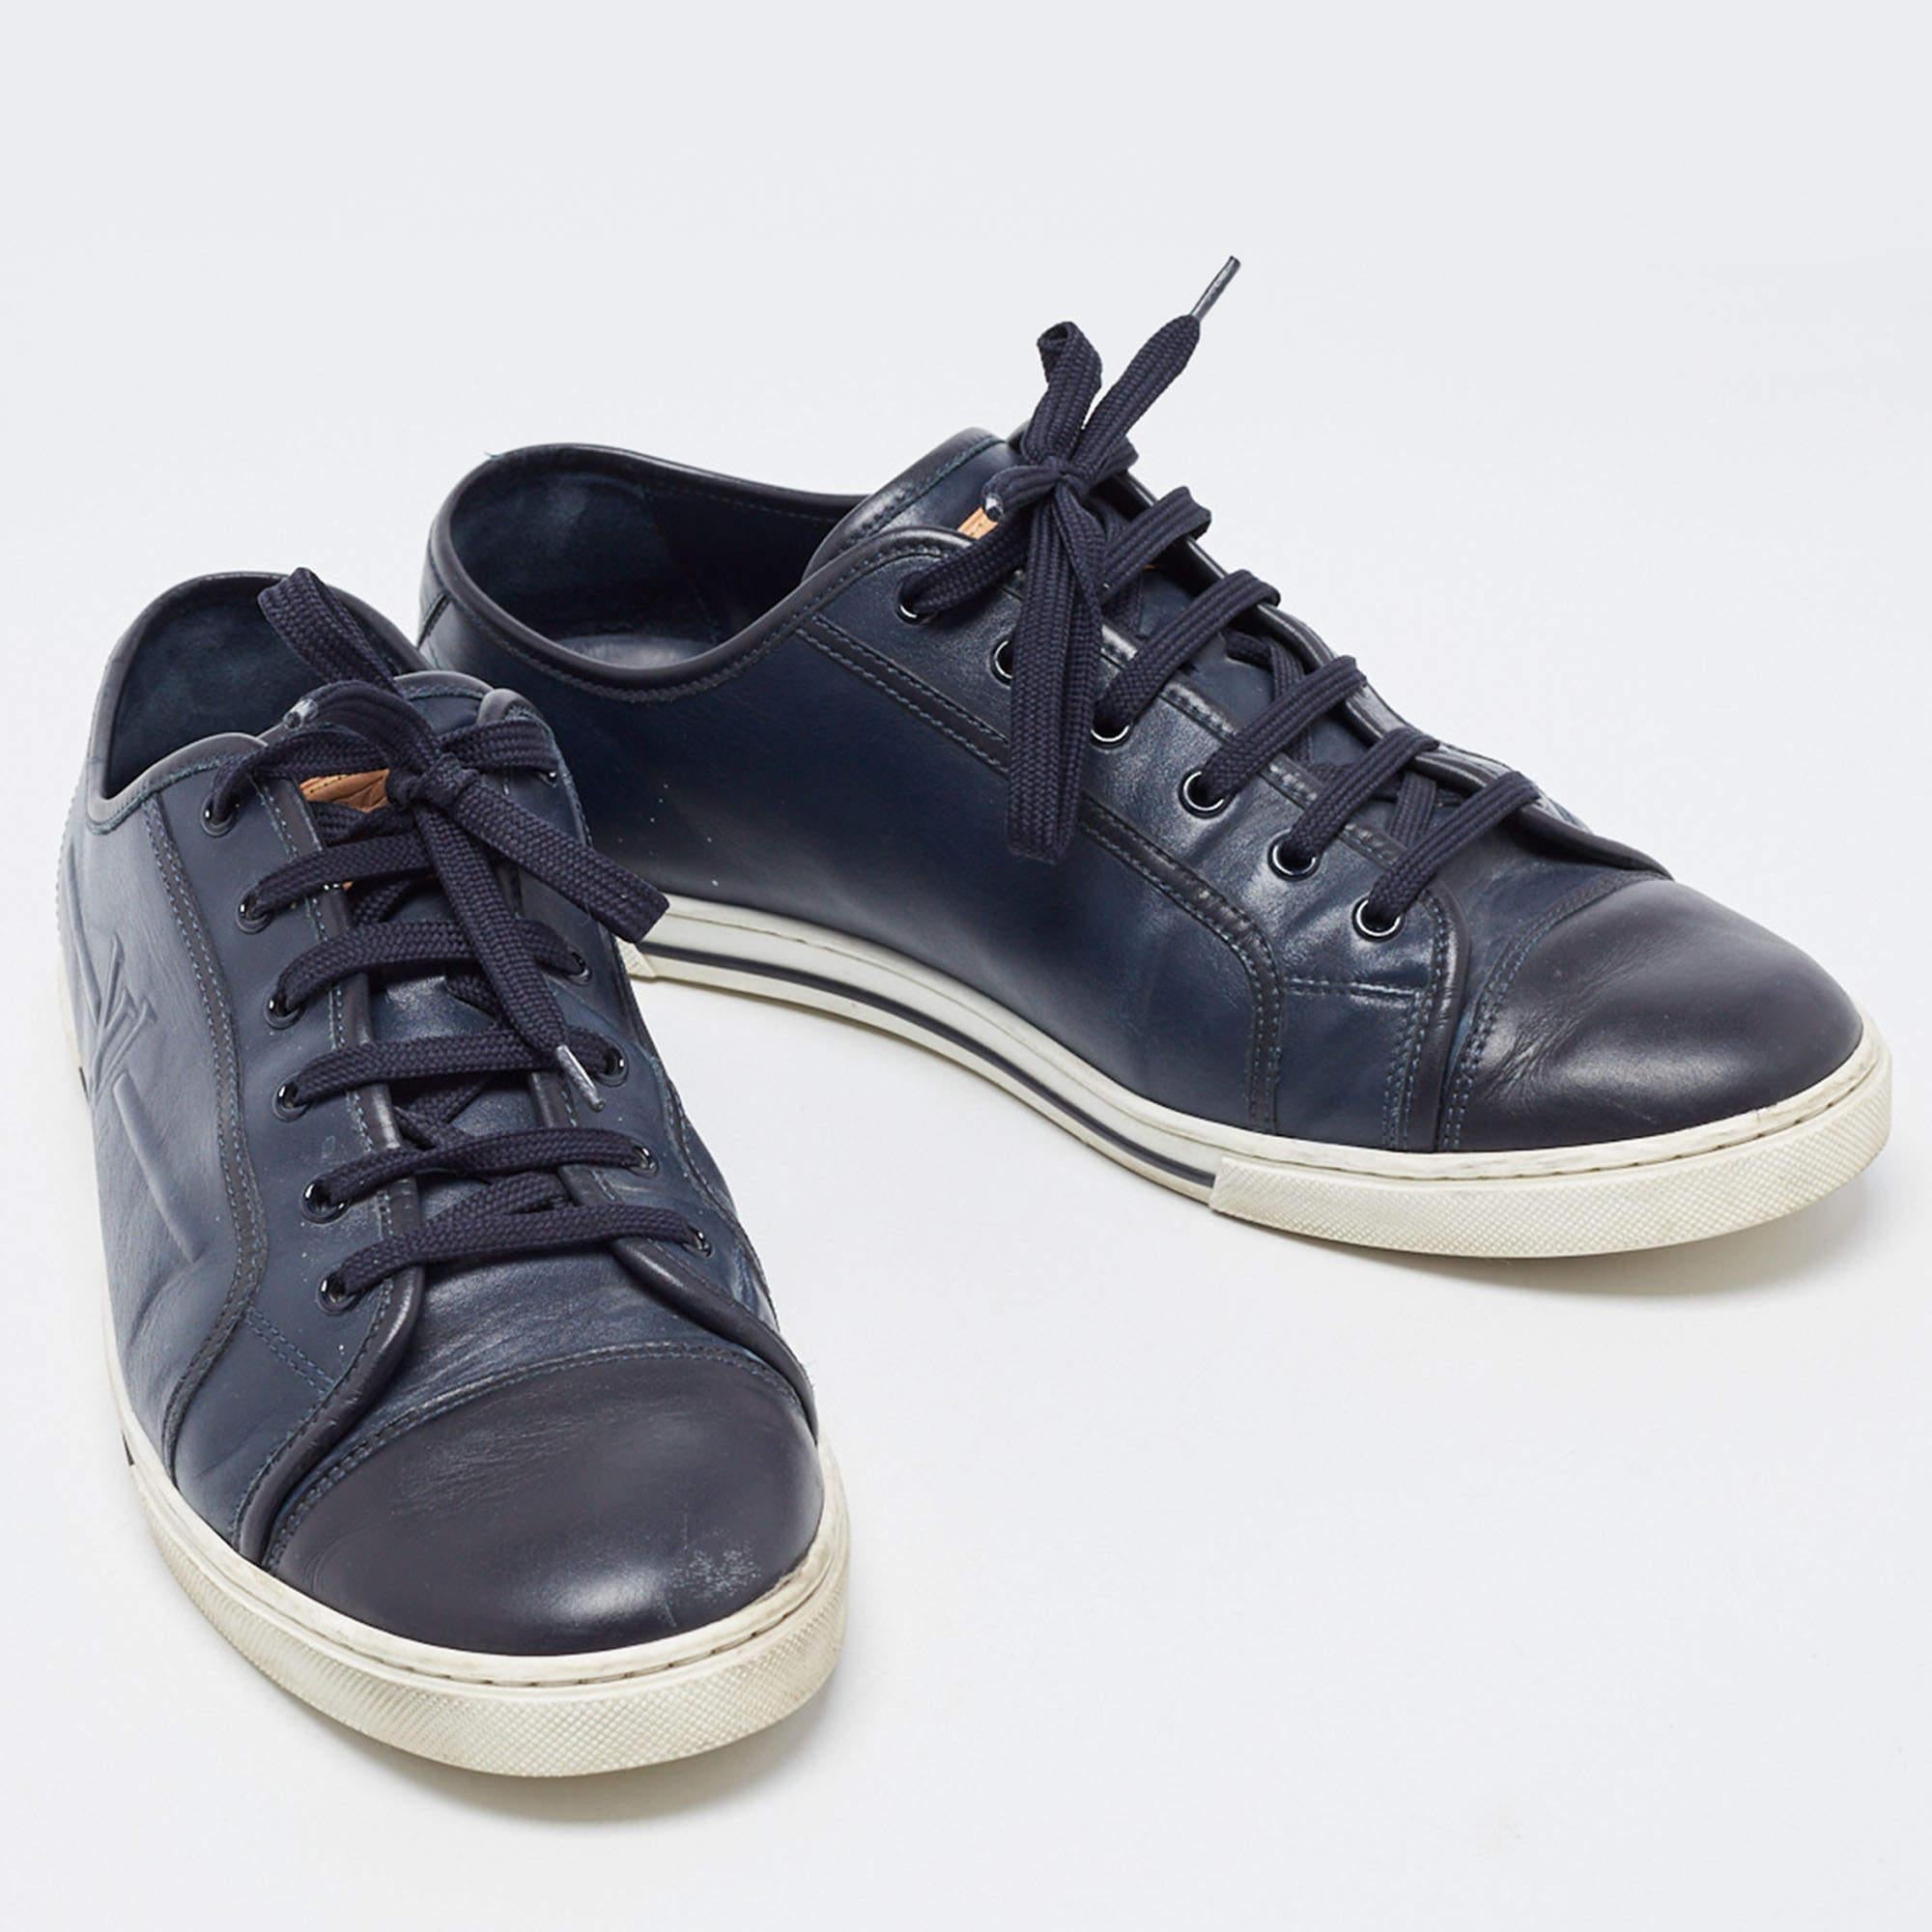 Experience footwear ease with this pair of navy blue low-top sneakers by Louis Vuitton. They've been crafted from leather and detailed with lace closure on the uppers. The leather insoles add to the comfort of the pair.

